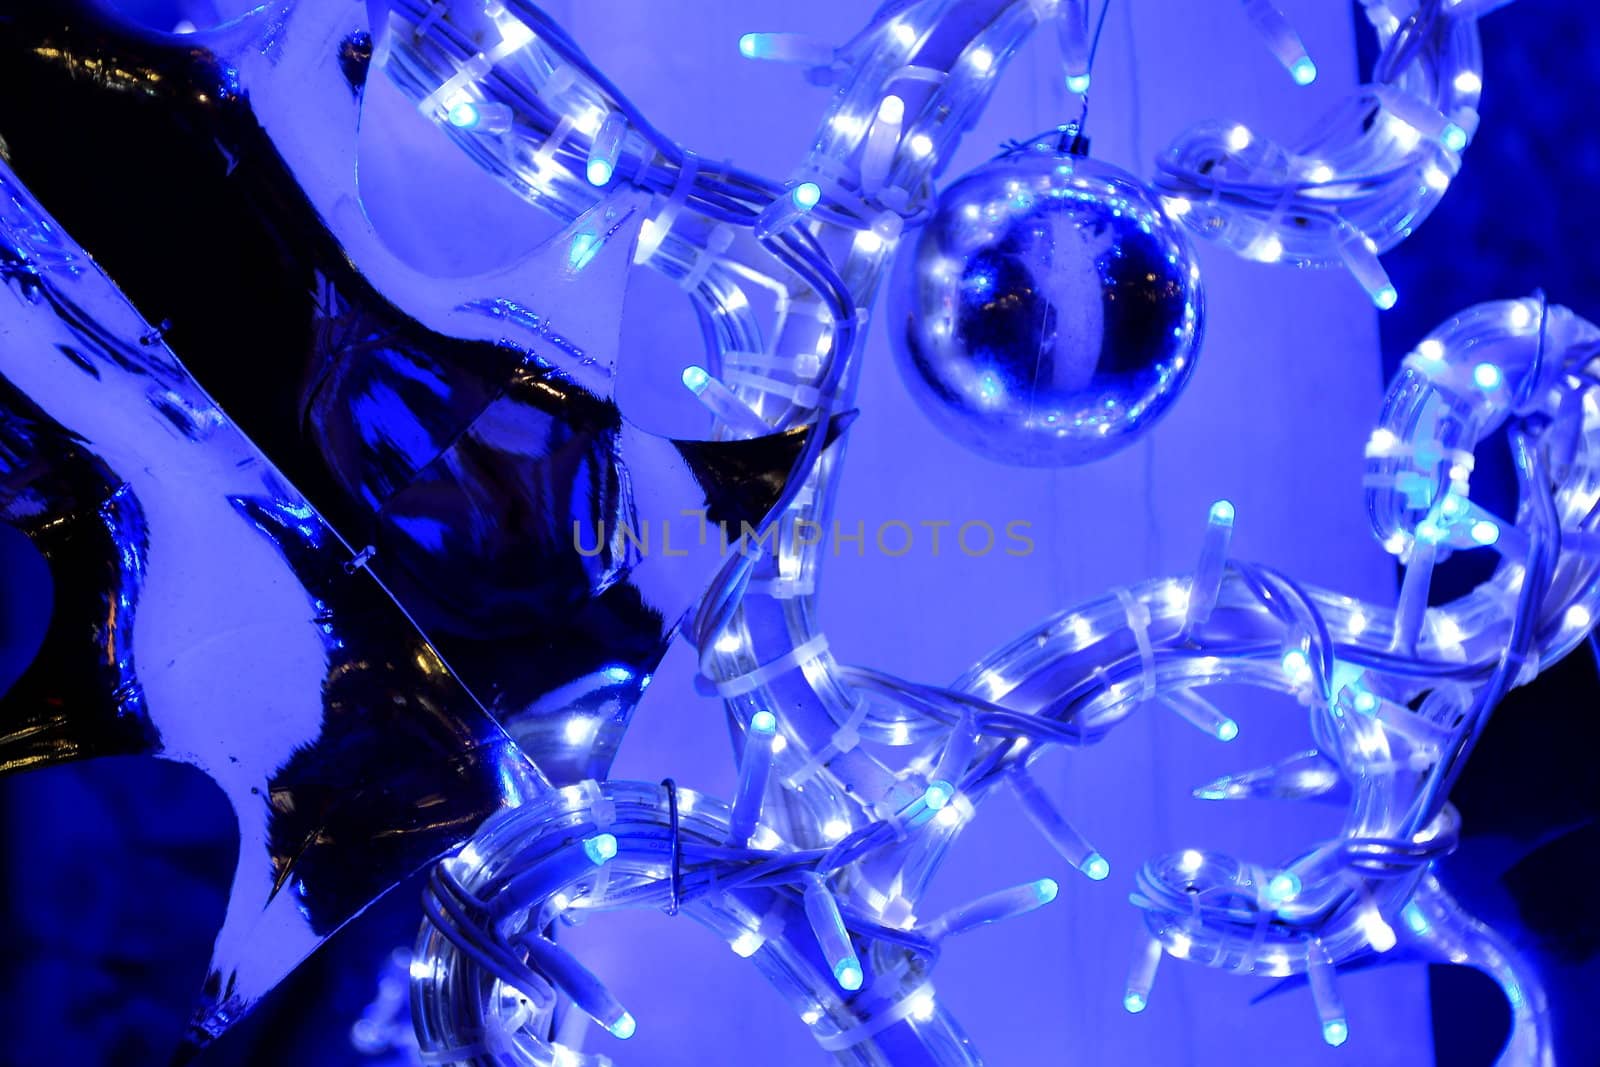 Abstract blue background with blue fairy lights and metallic foil